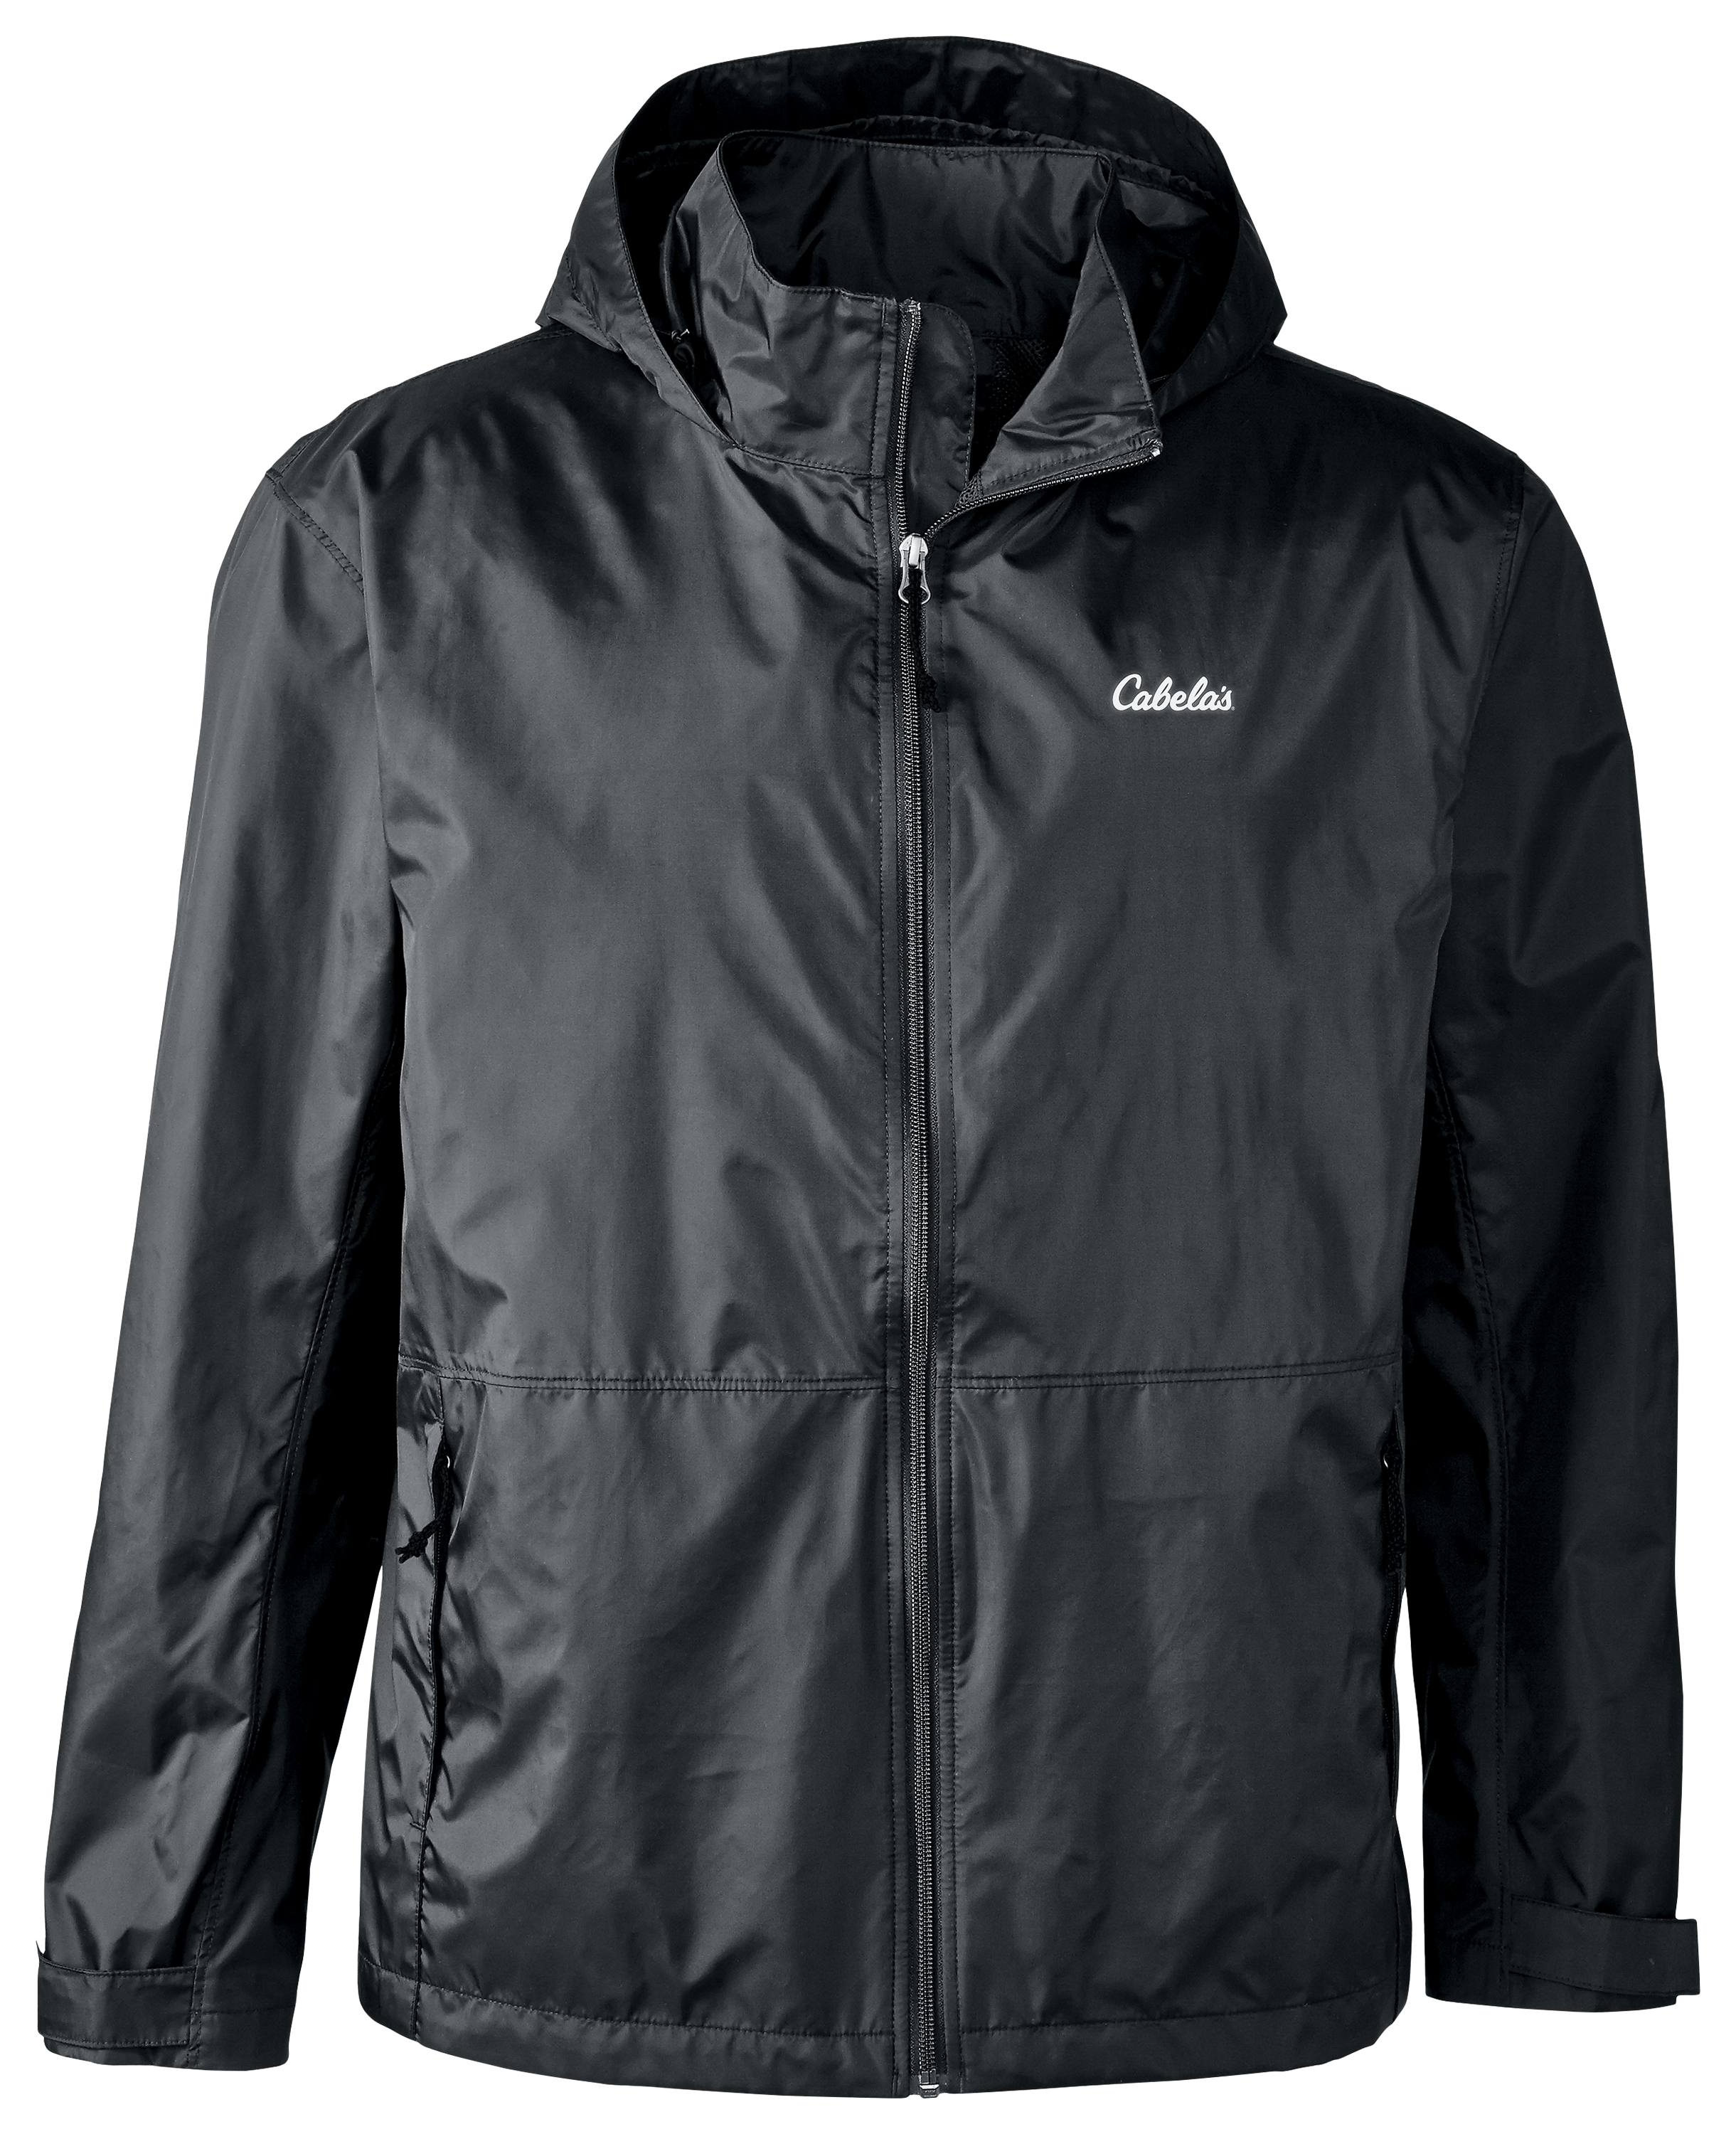 Cabela's Rain Swept Jacket with 4MOST Repel for Men - Spiced Red - XL